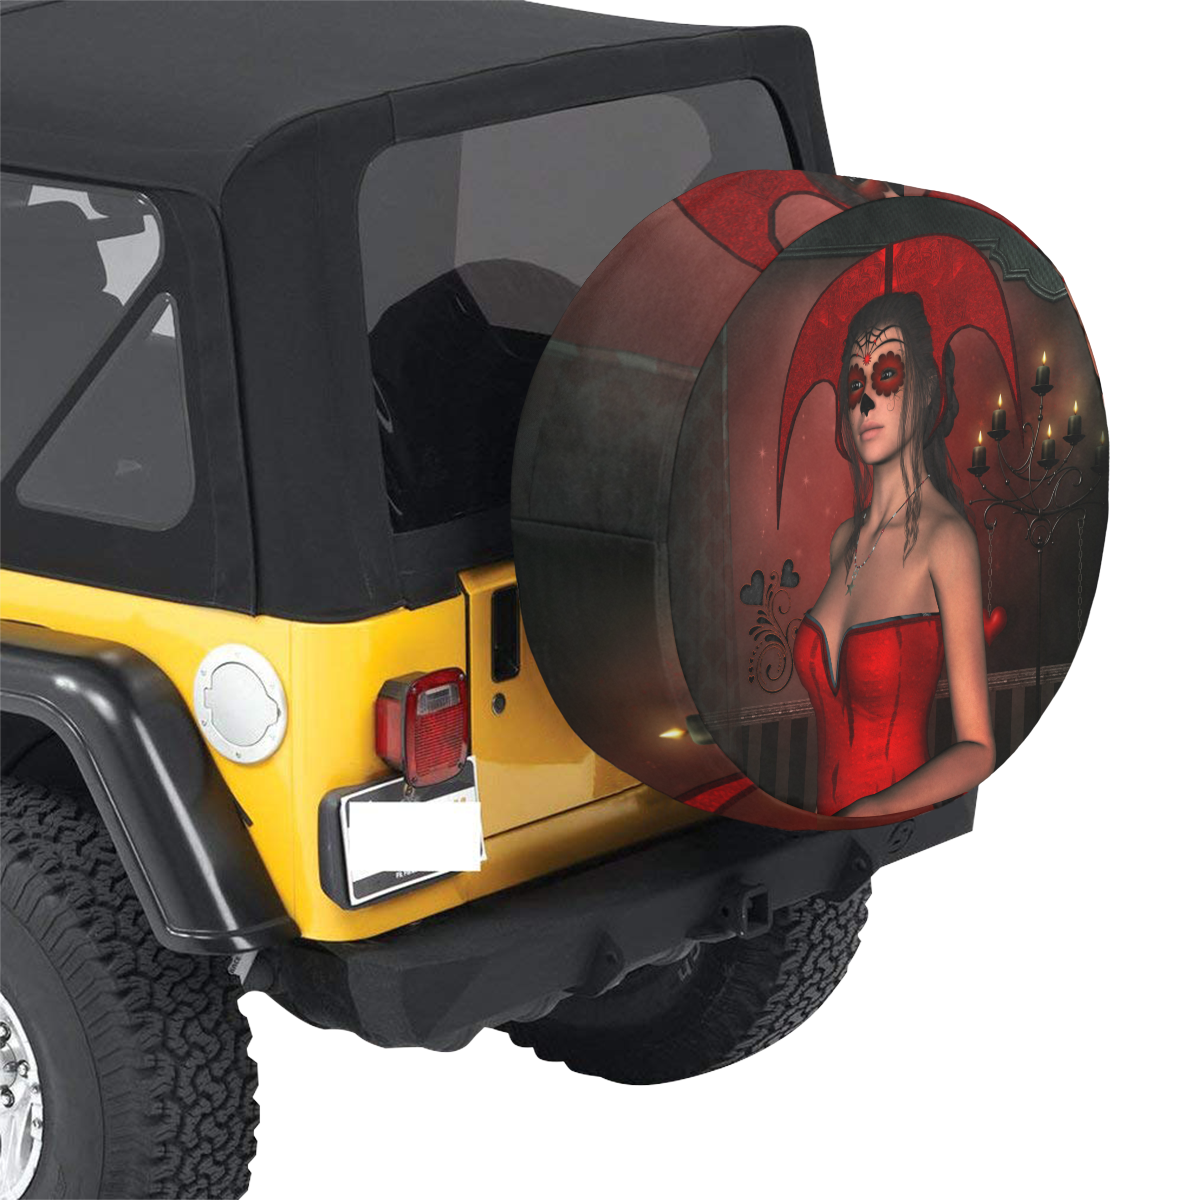 Awesome lady with sugar skull face 34 Inch Spare Tire Cover